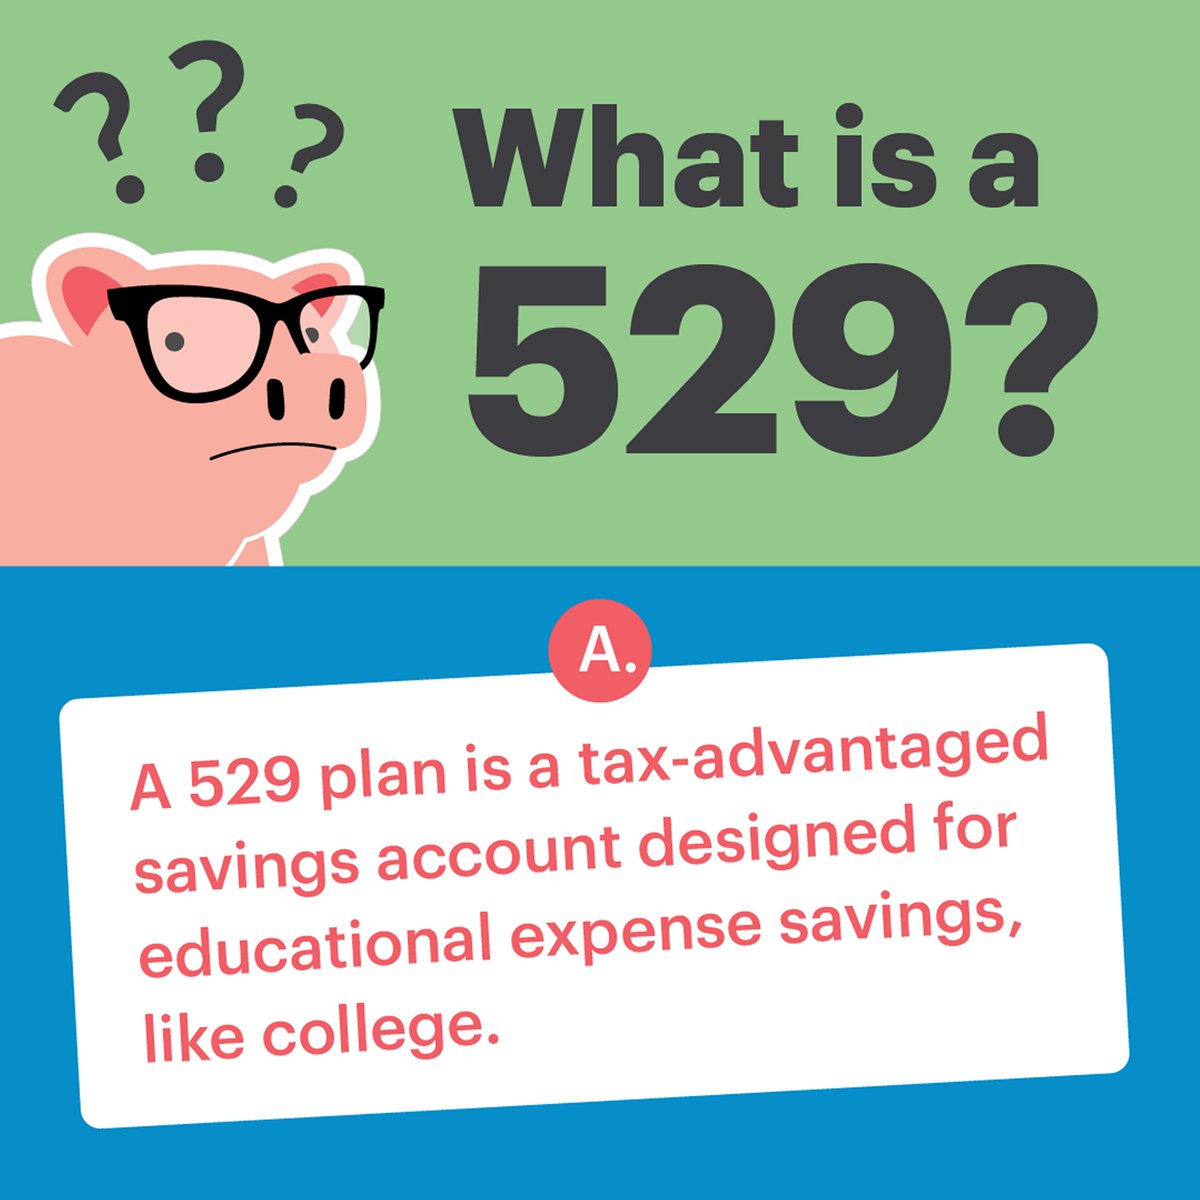 Let’s talk 529s on 5/29. Learn more: sallie.cc/529 #Savings #SmartyPig